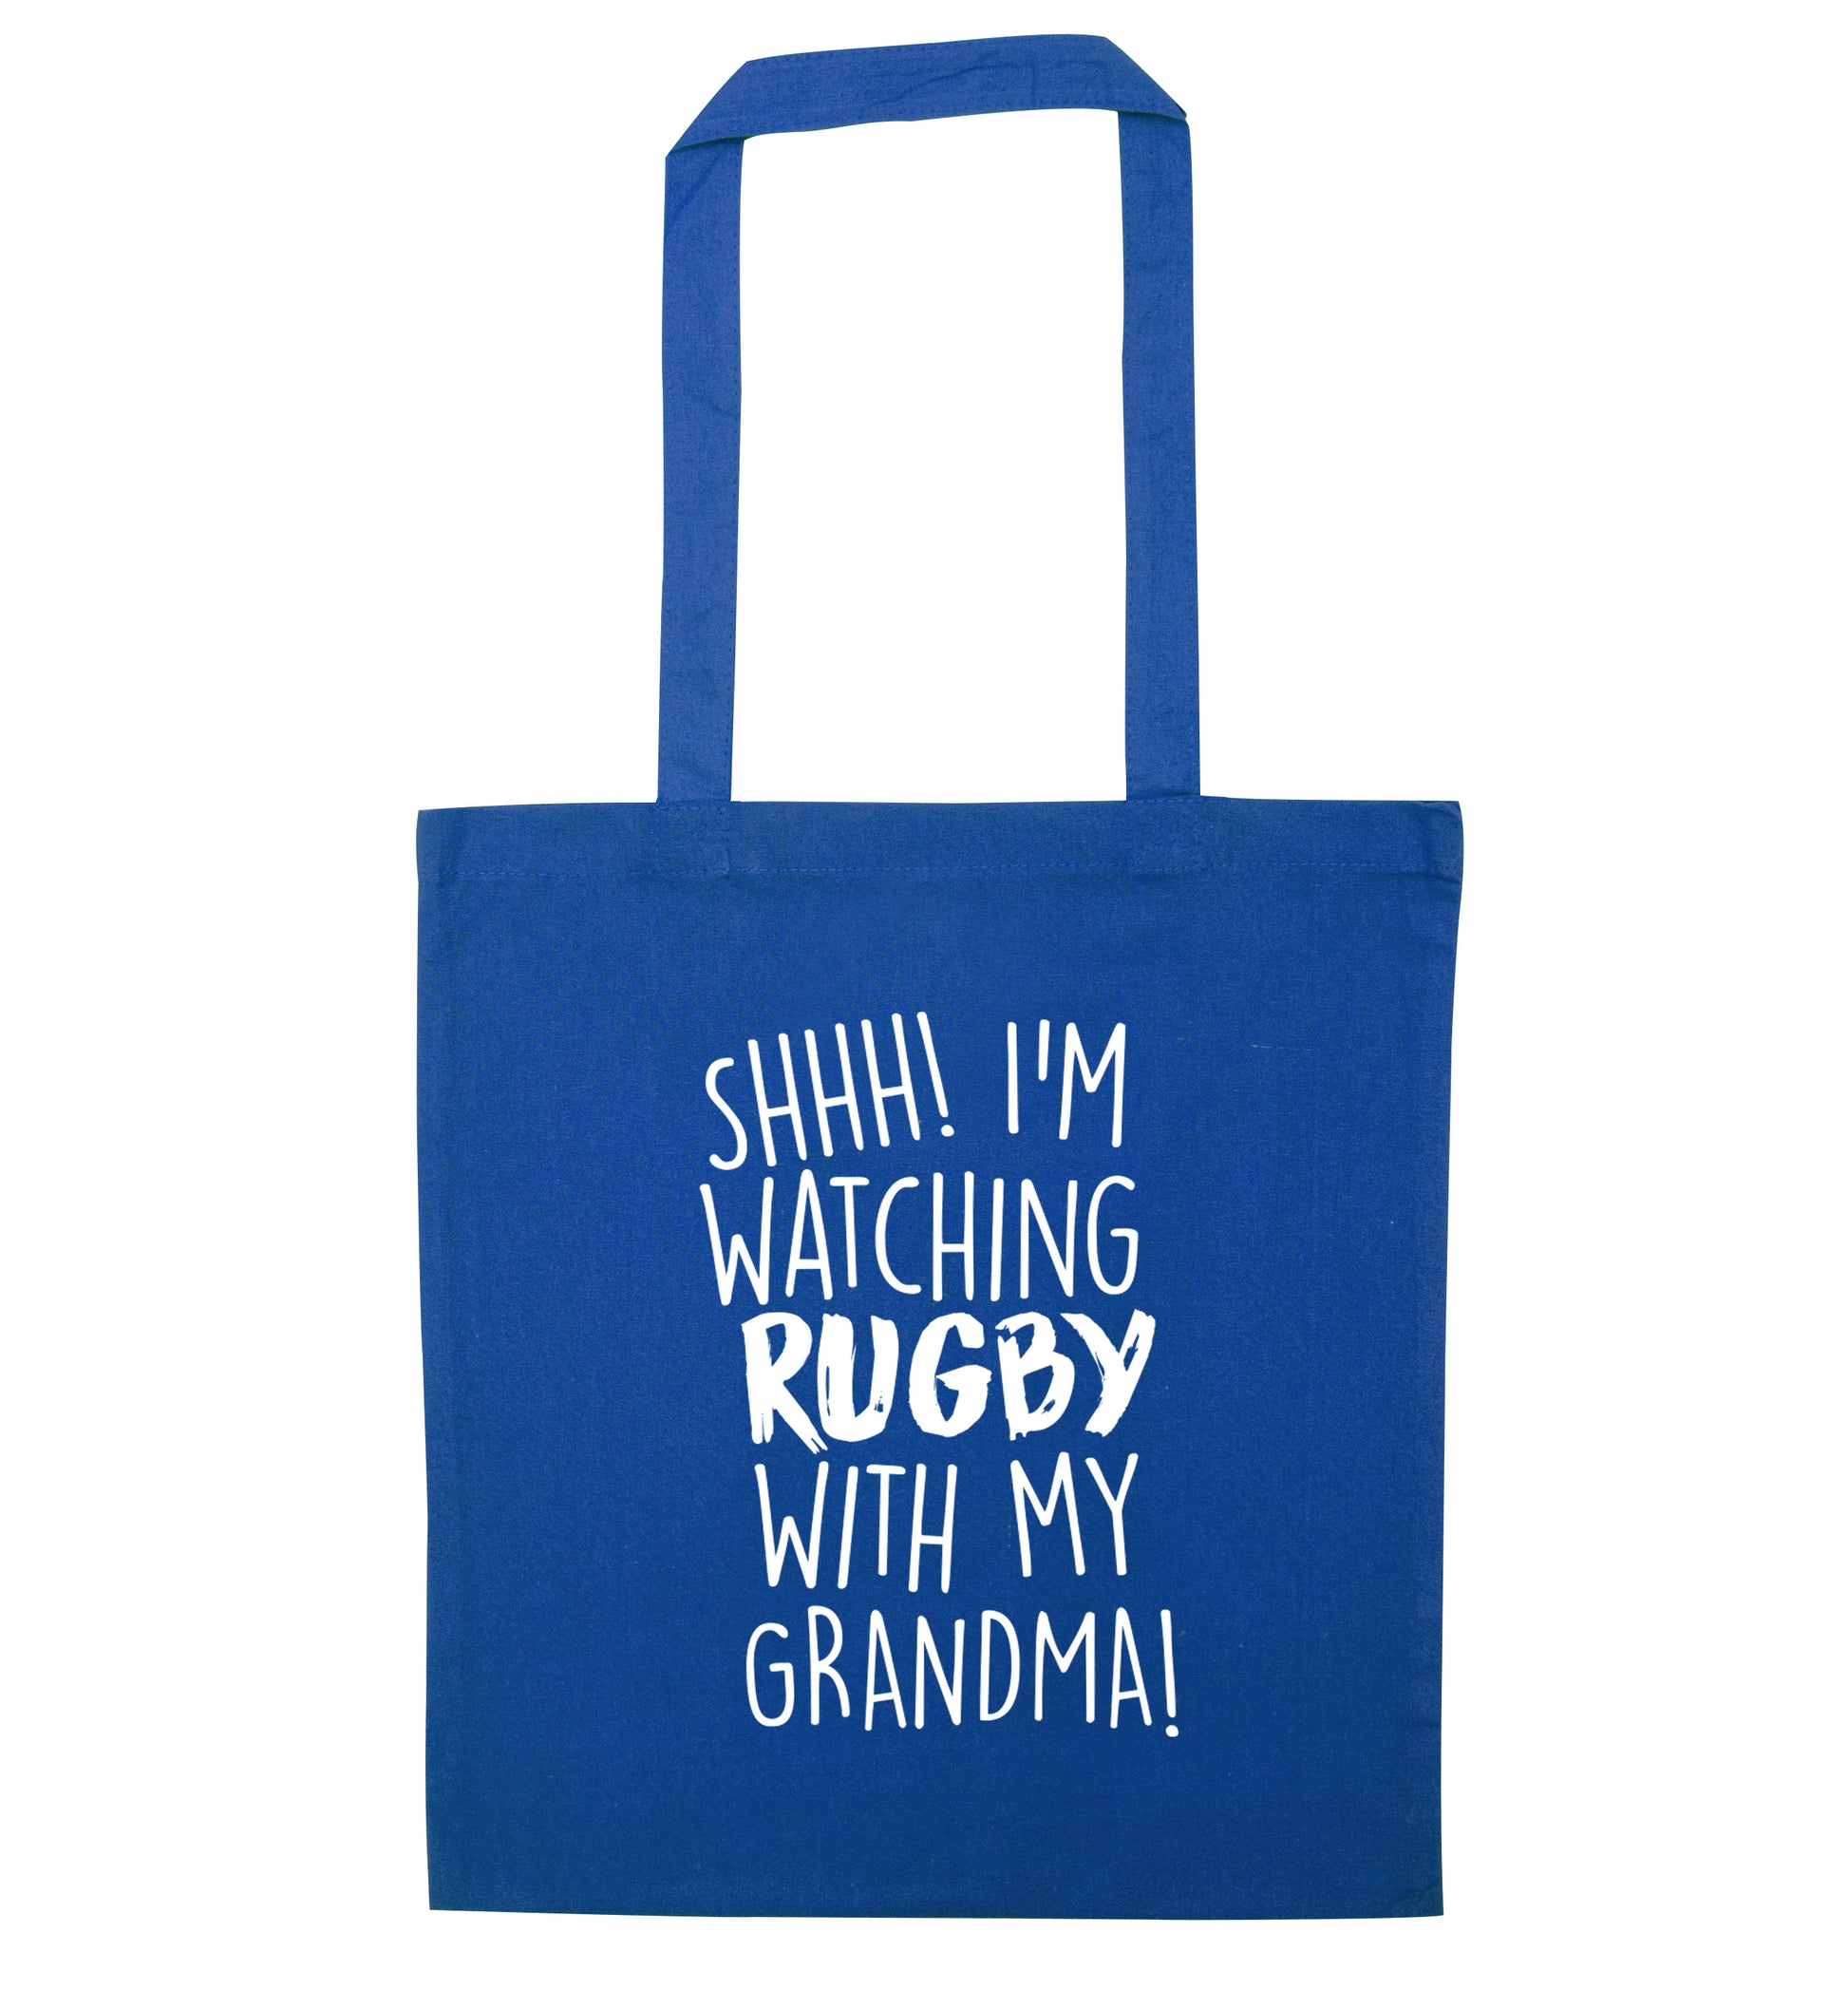 Shh I'm watching rugby with my grandma blue tote bag